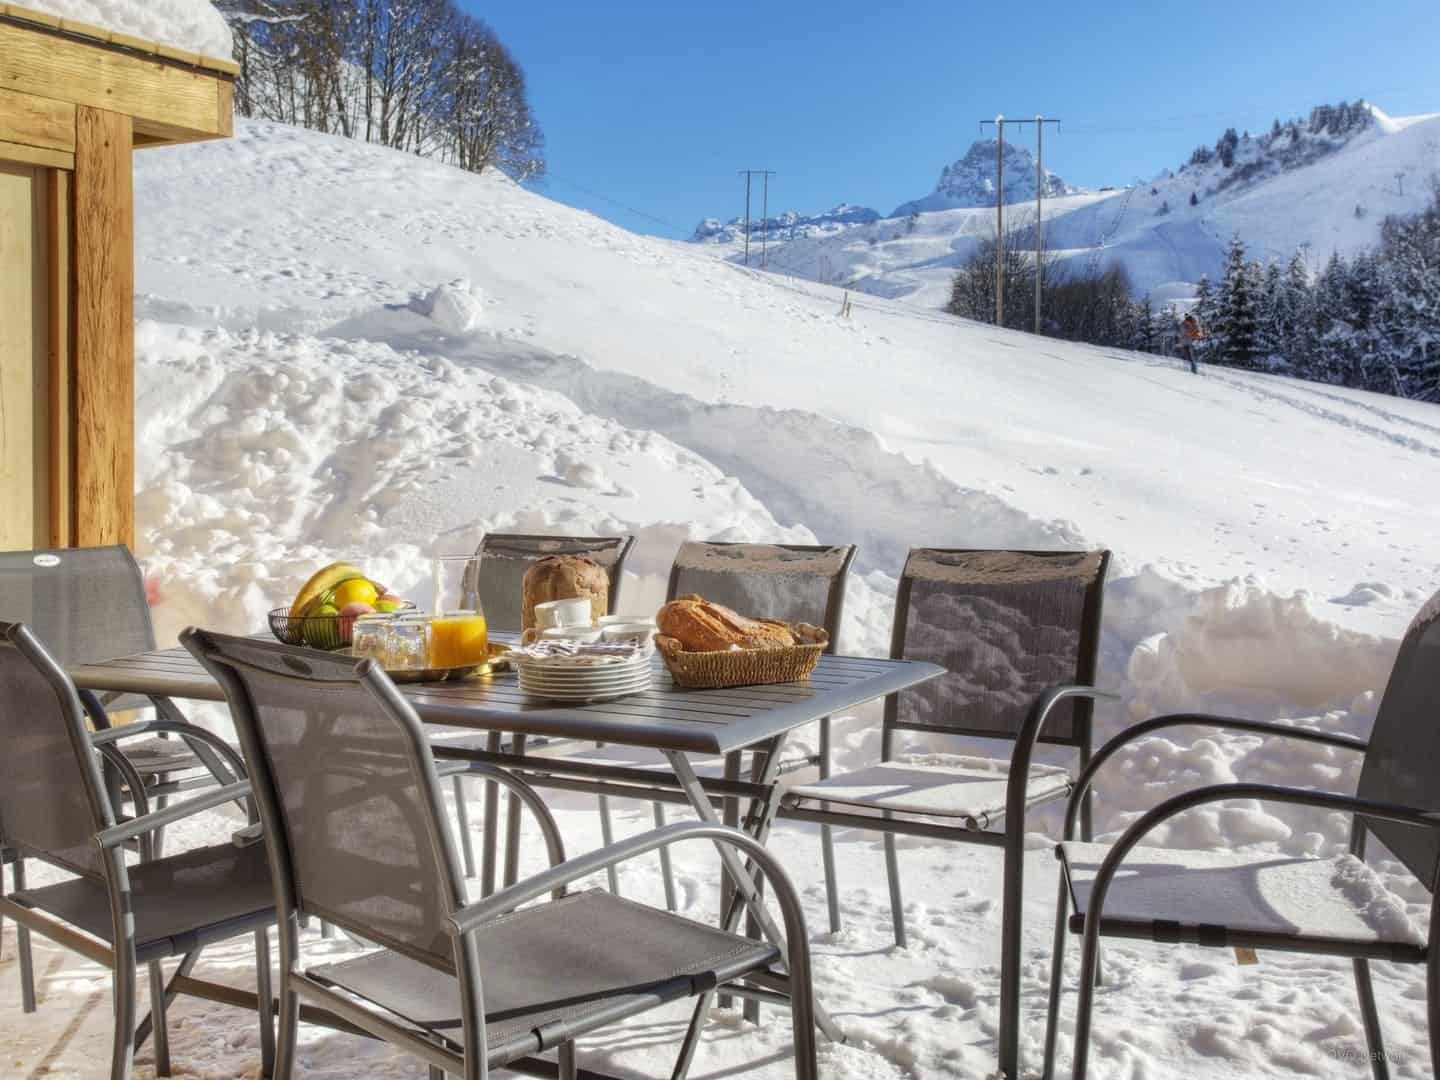 The dining table in the snow at Chalet Argali